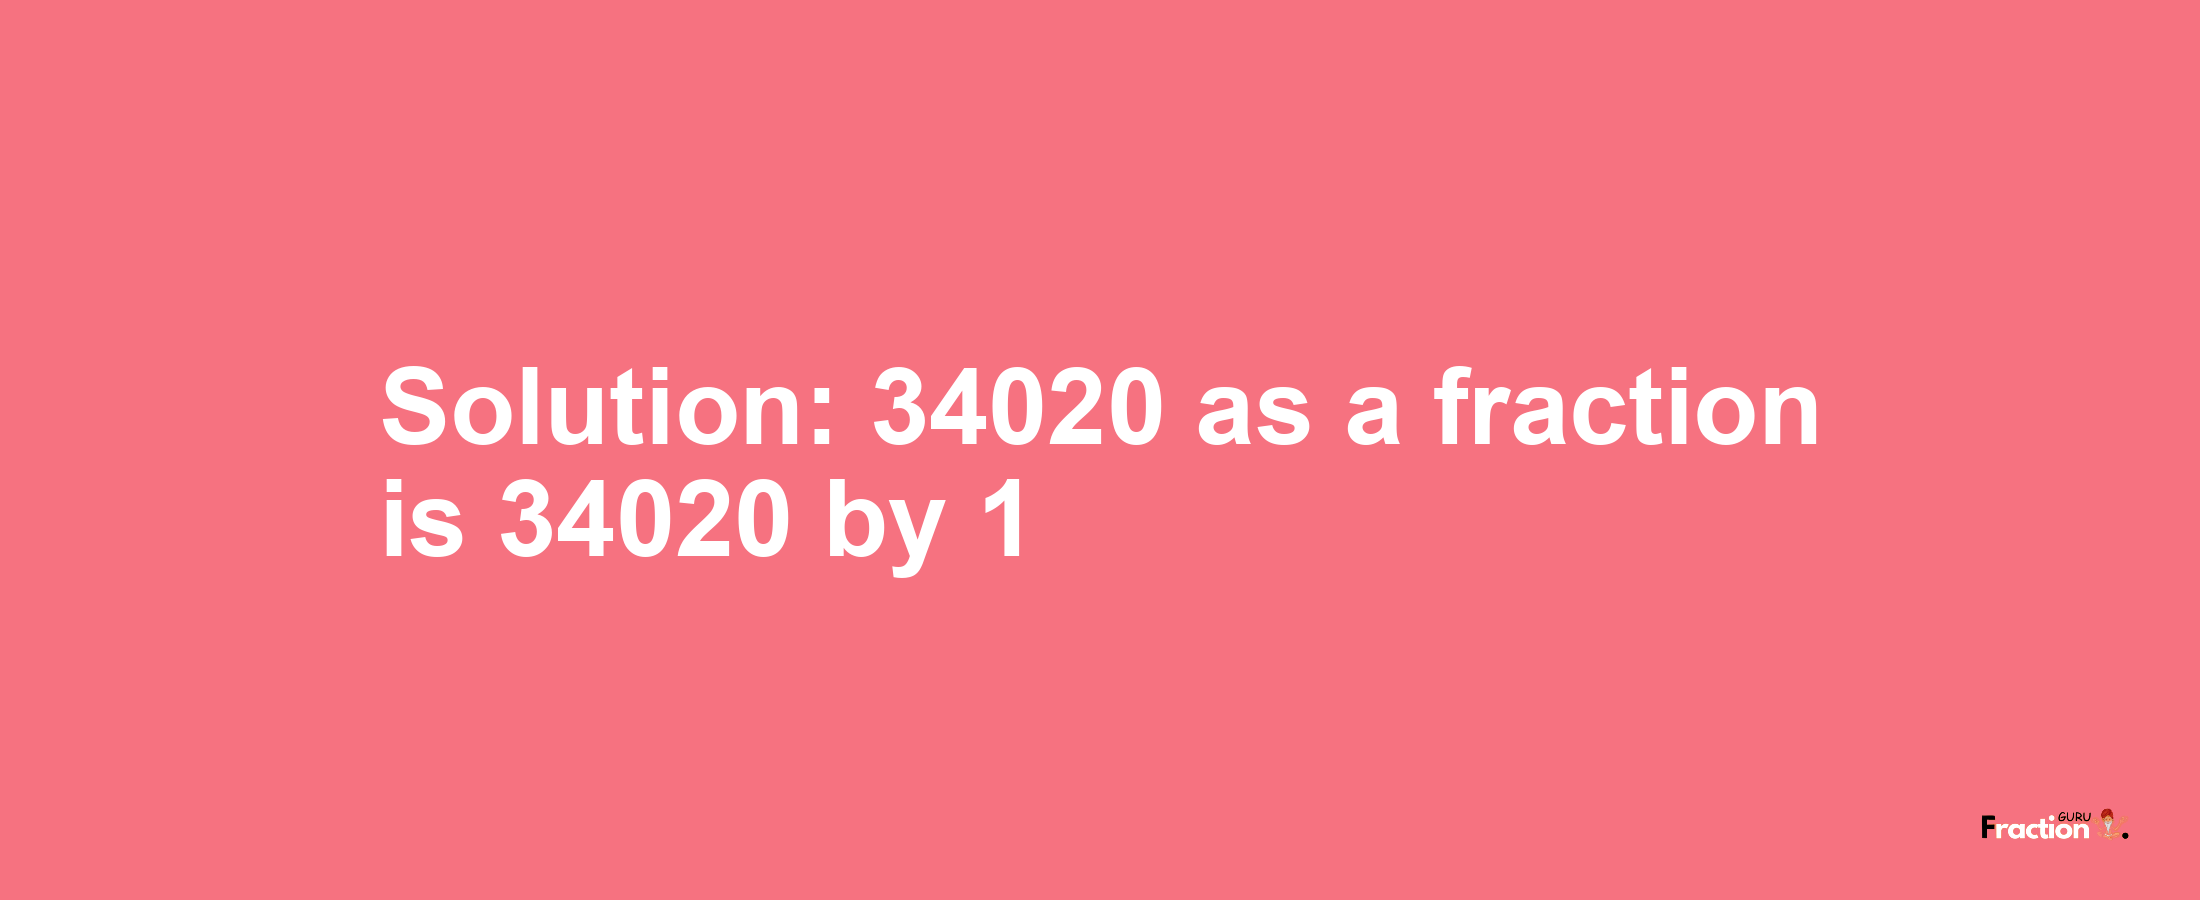 Solution:34020 as a fraction is 34020/1